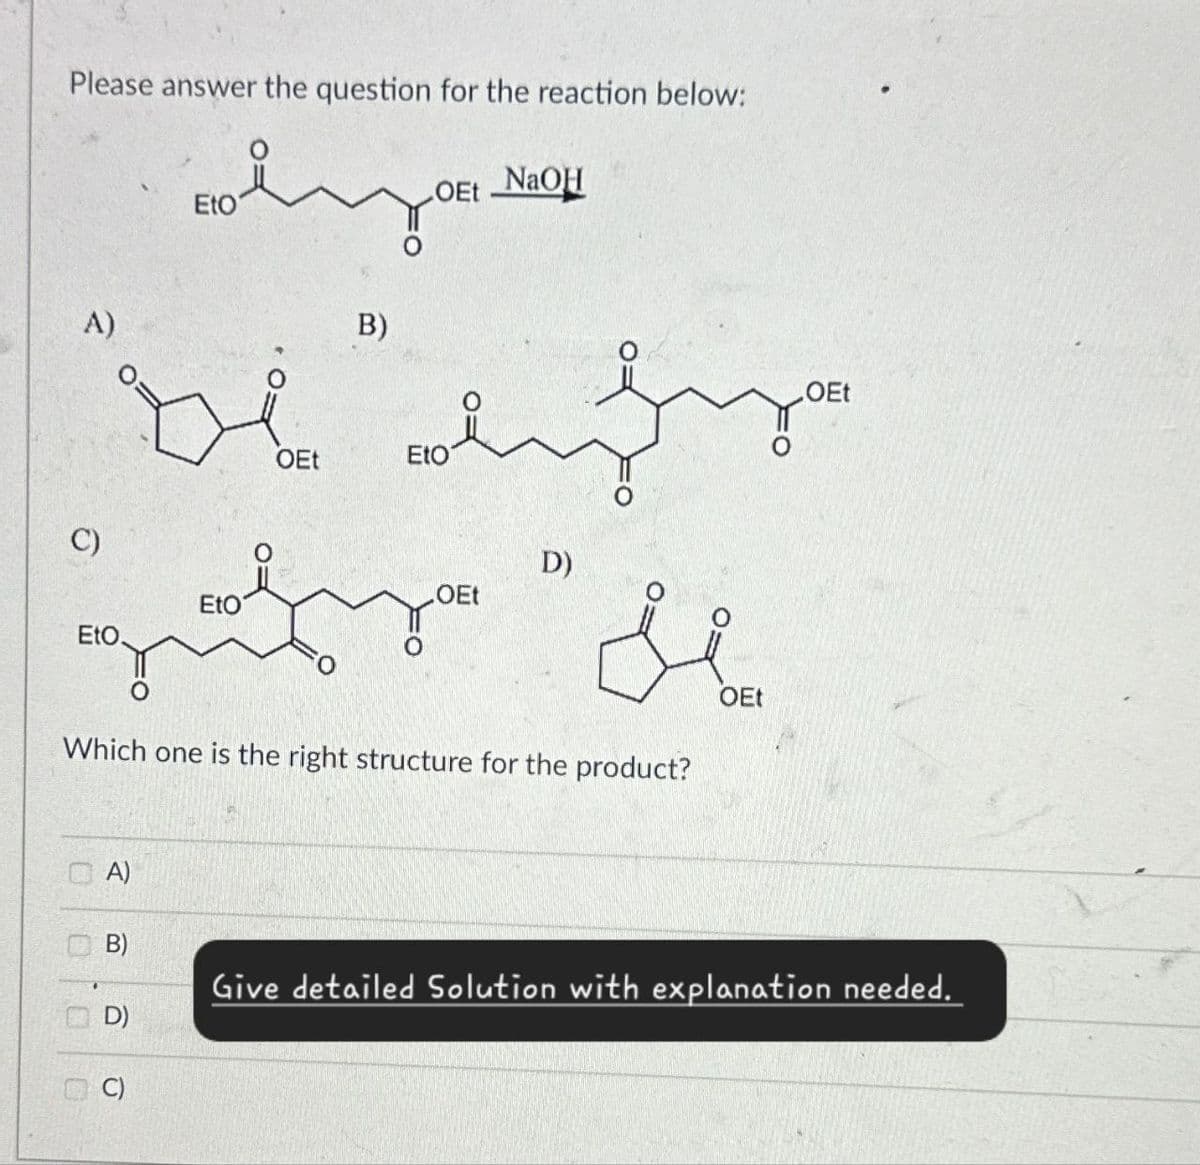 Please answer the question for the reaction below:
A)
Eto
Boot!
OEt NaOH
B)
OEt
مجة لة
OEt
EtO
C)
.OEt
EtO
EtO
D)
Si
Which one is the right structure for the product?
OEt
A)
B)
D)
C)
Give detailed Solution with explanation needed.